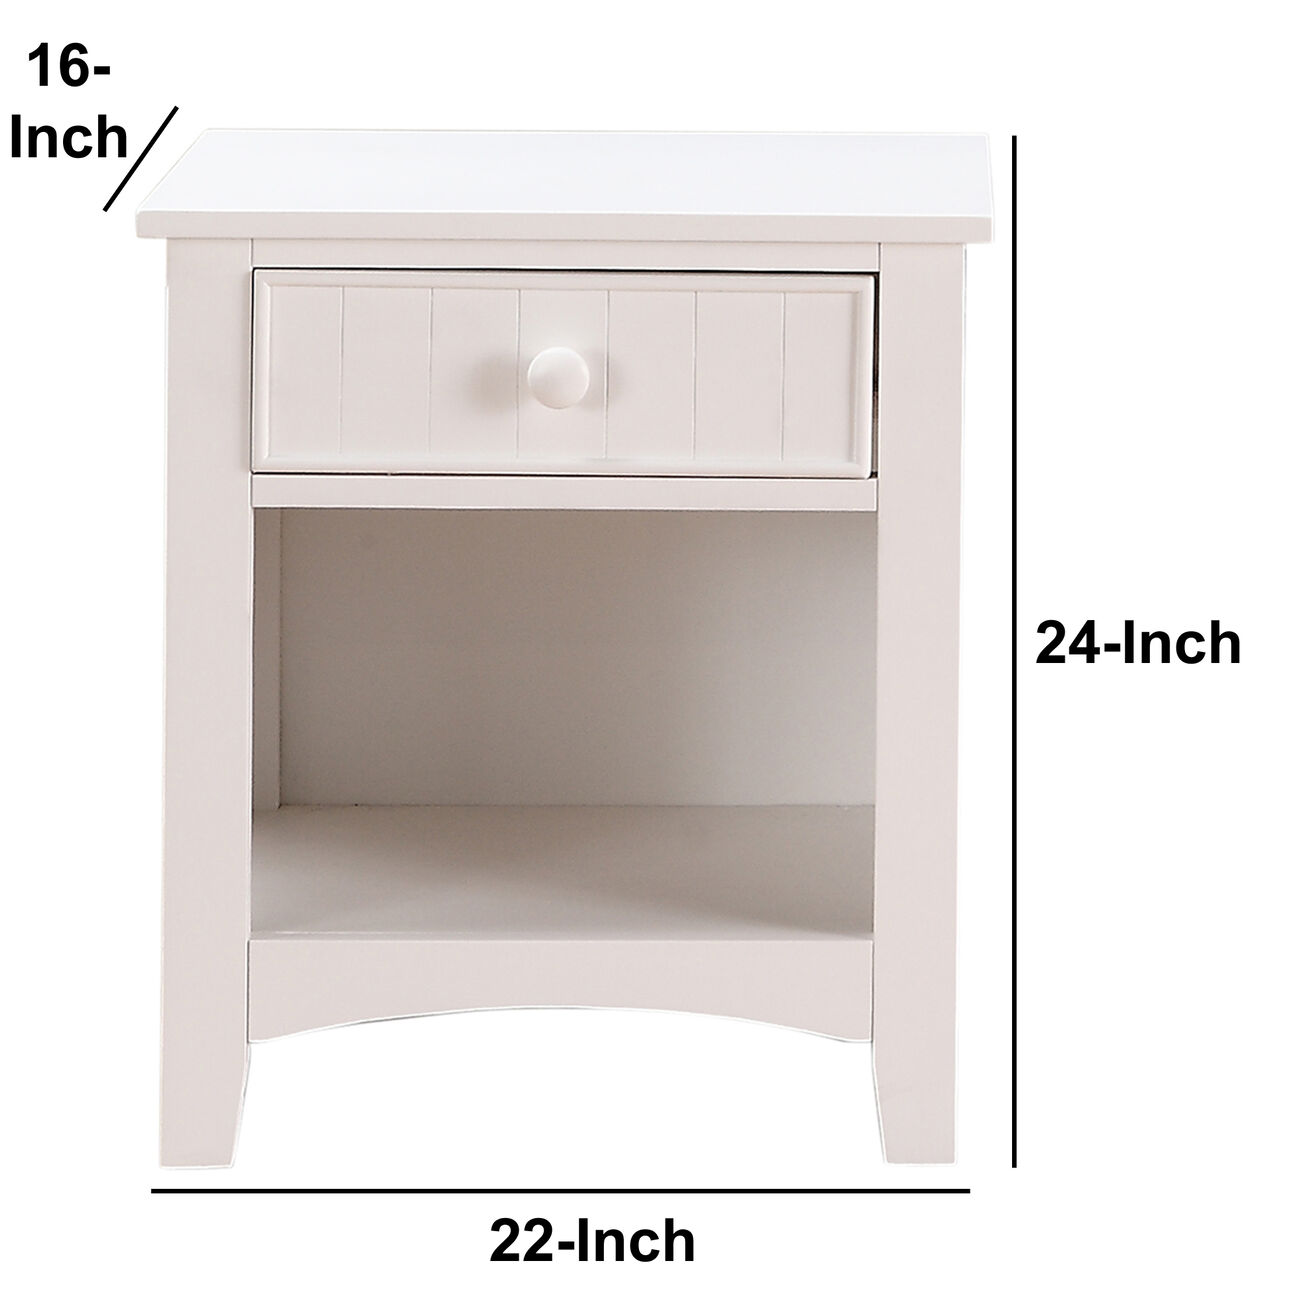 Wooden Night Stand With Bottom Open Shelf, White